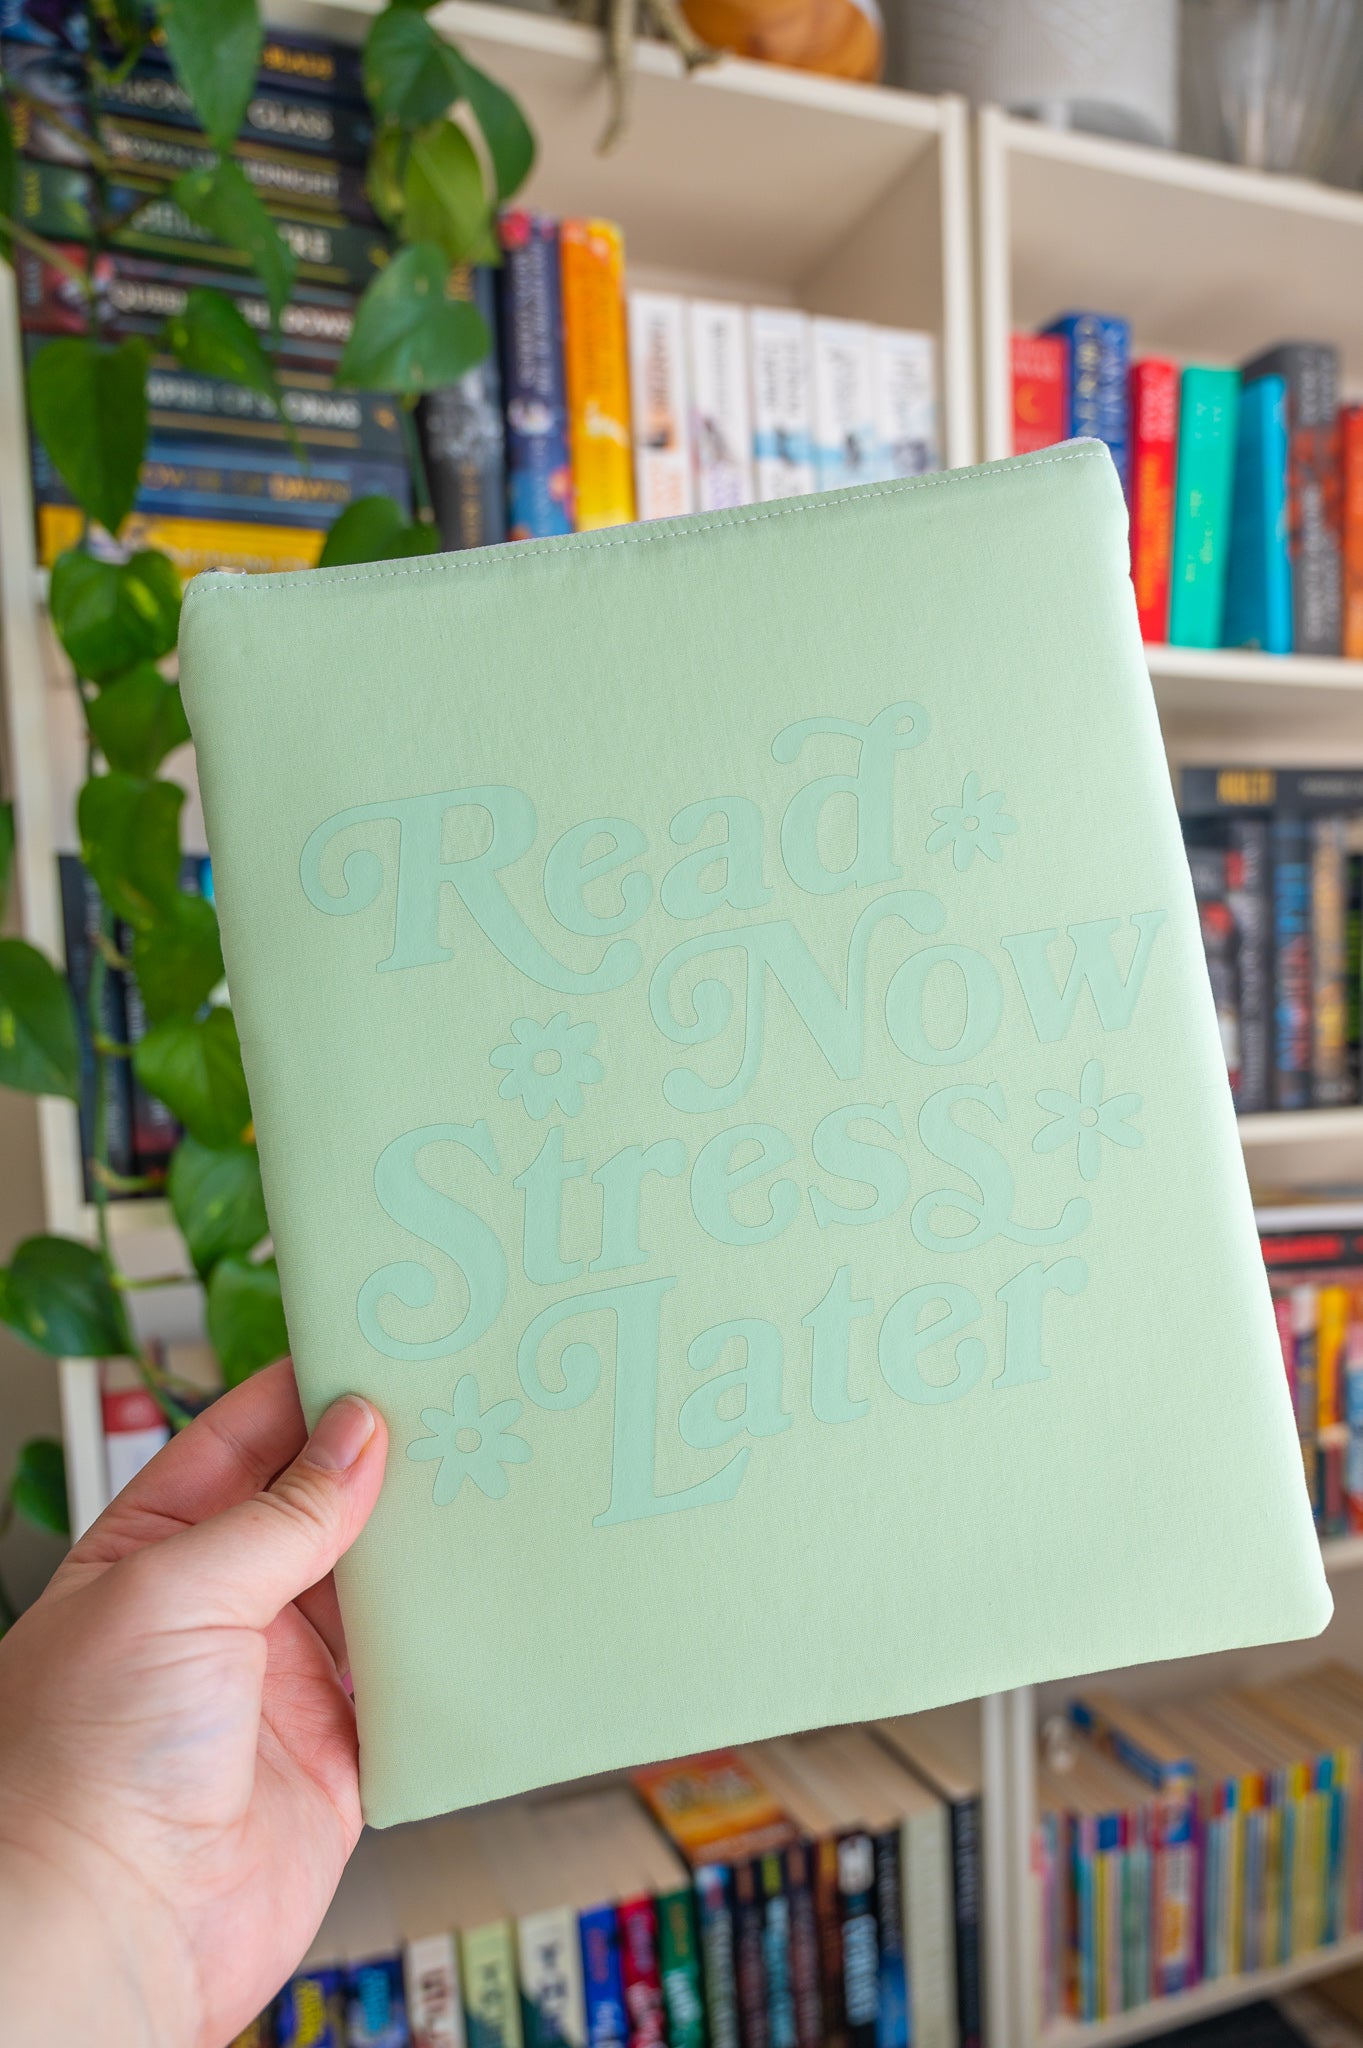 Read Now Stress Later Paperback Book Sleeve